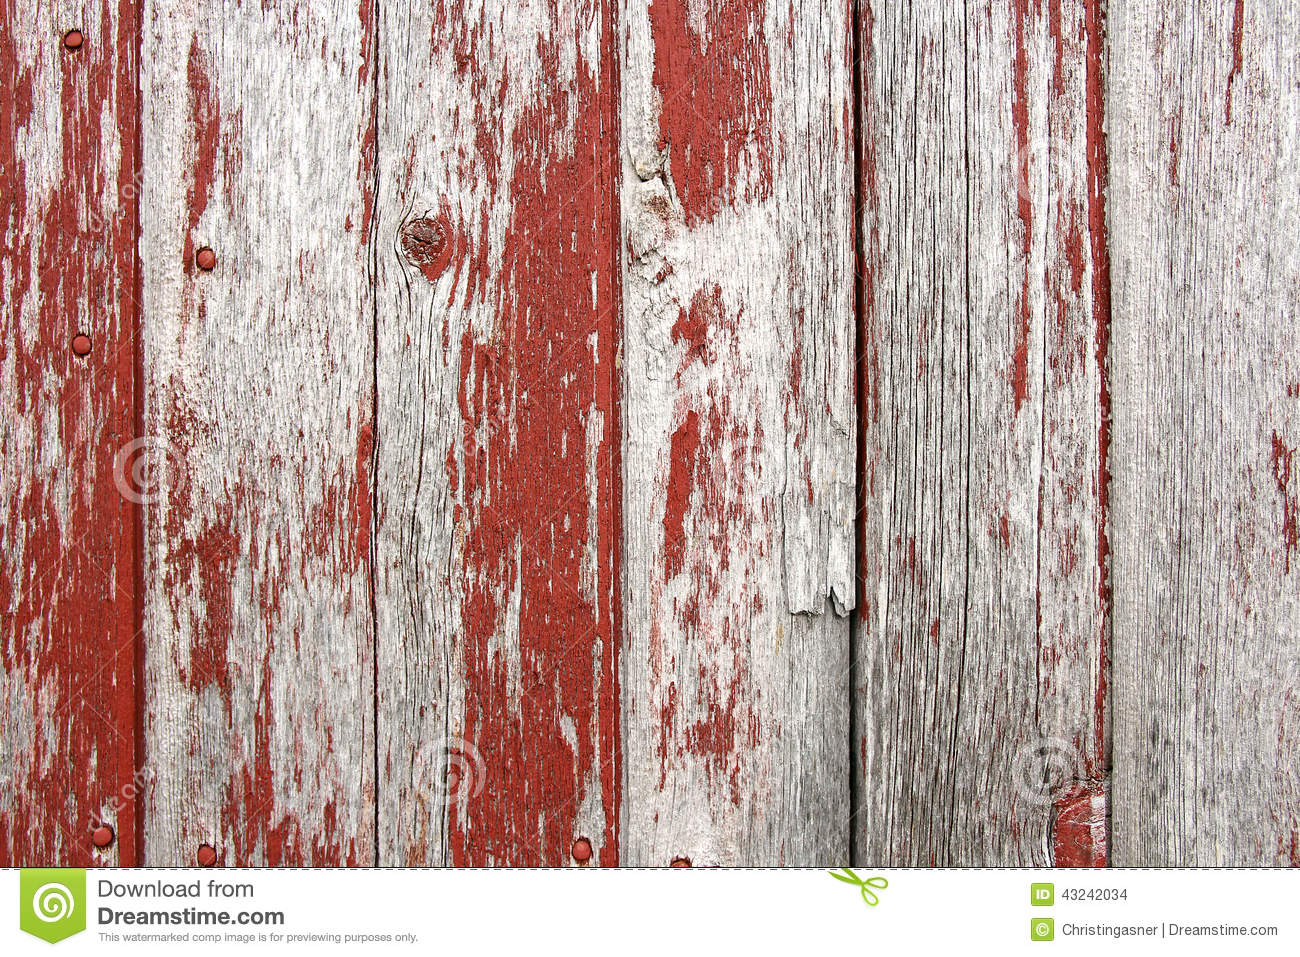 red rustic barn wood background aged barnwood boards peeling paint 1300x957